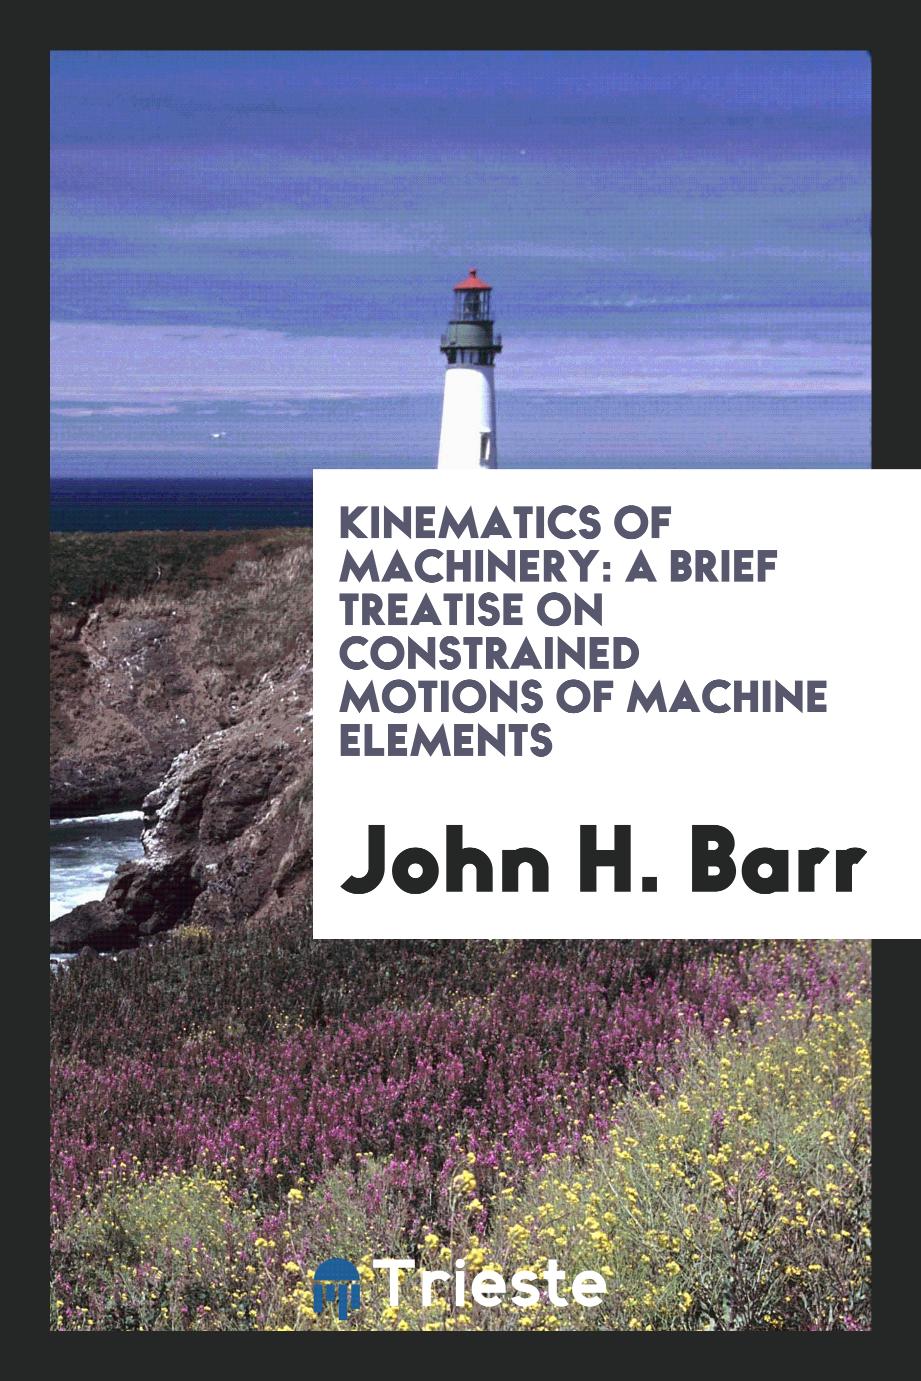 Kinematics of Machinery: A Brief Treatise on Constrained Motions of Machine Elements